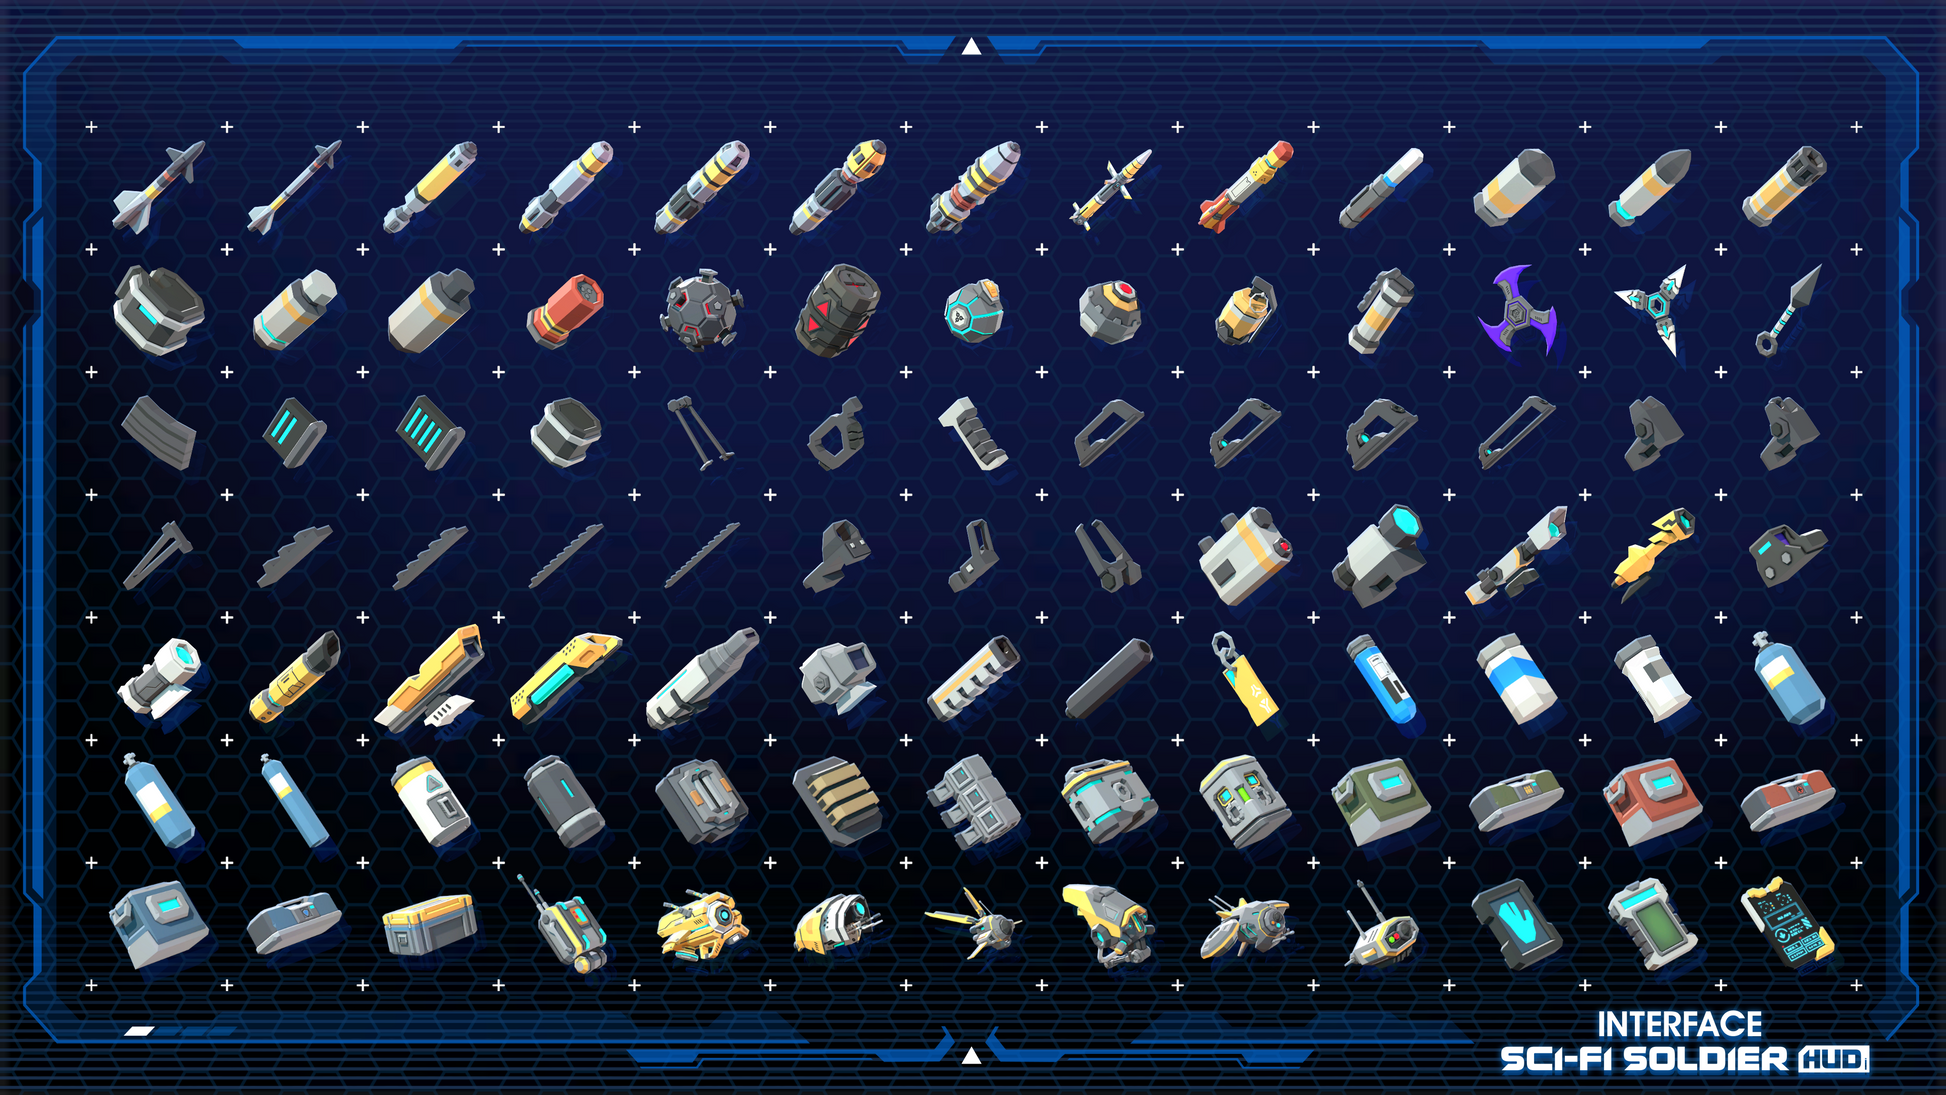 Consumables icons for games from the INTERFACE Sci-Fi Soldier HUD 3D game asset pack